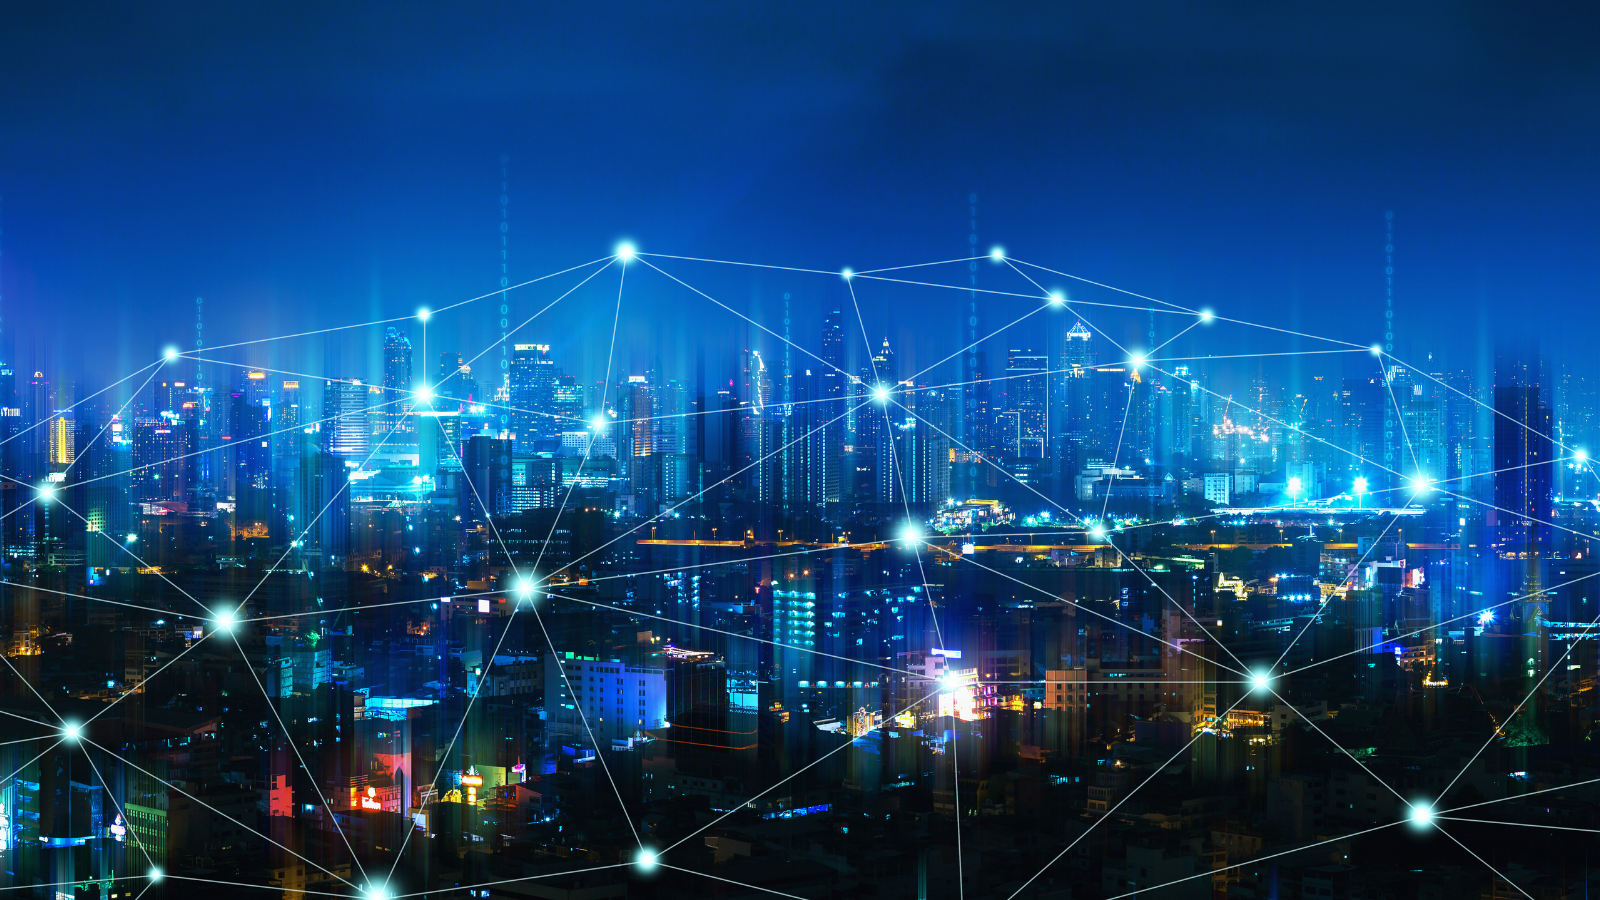 A graphic with a photo of a night time city skyline with an illustration portraying a network overlaid over top.